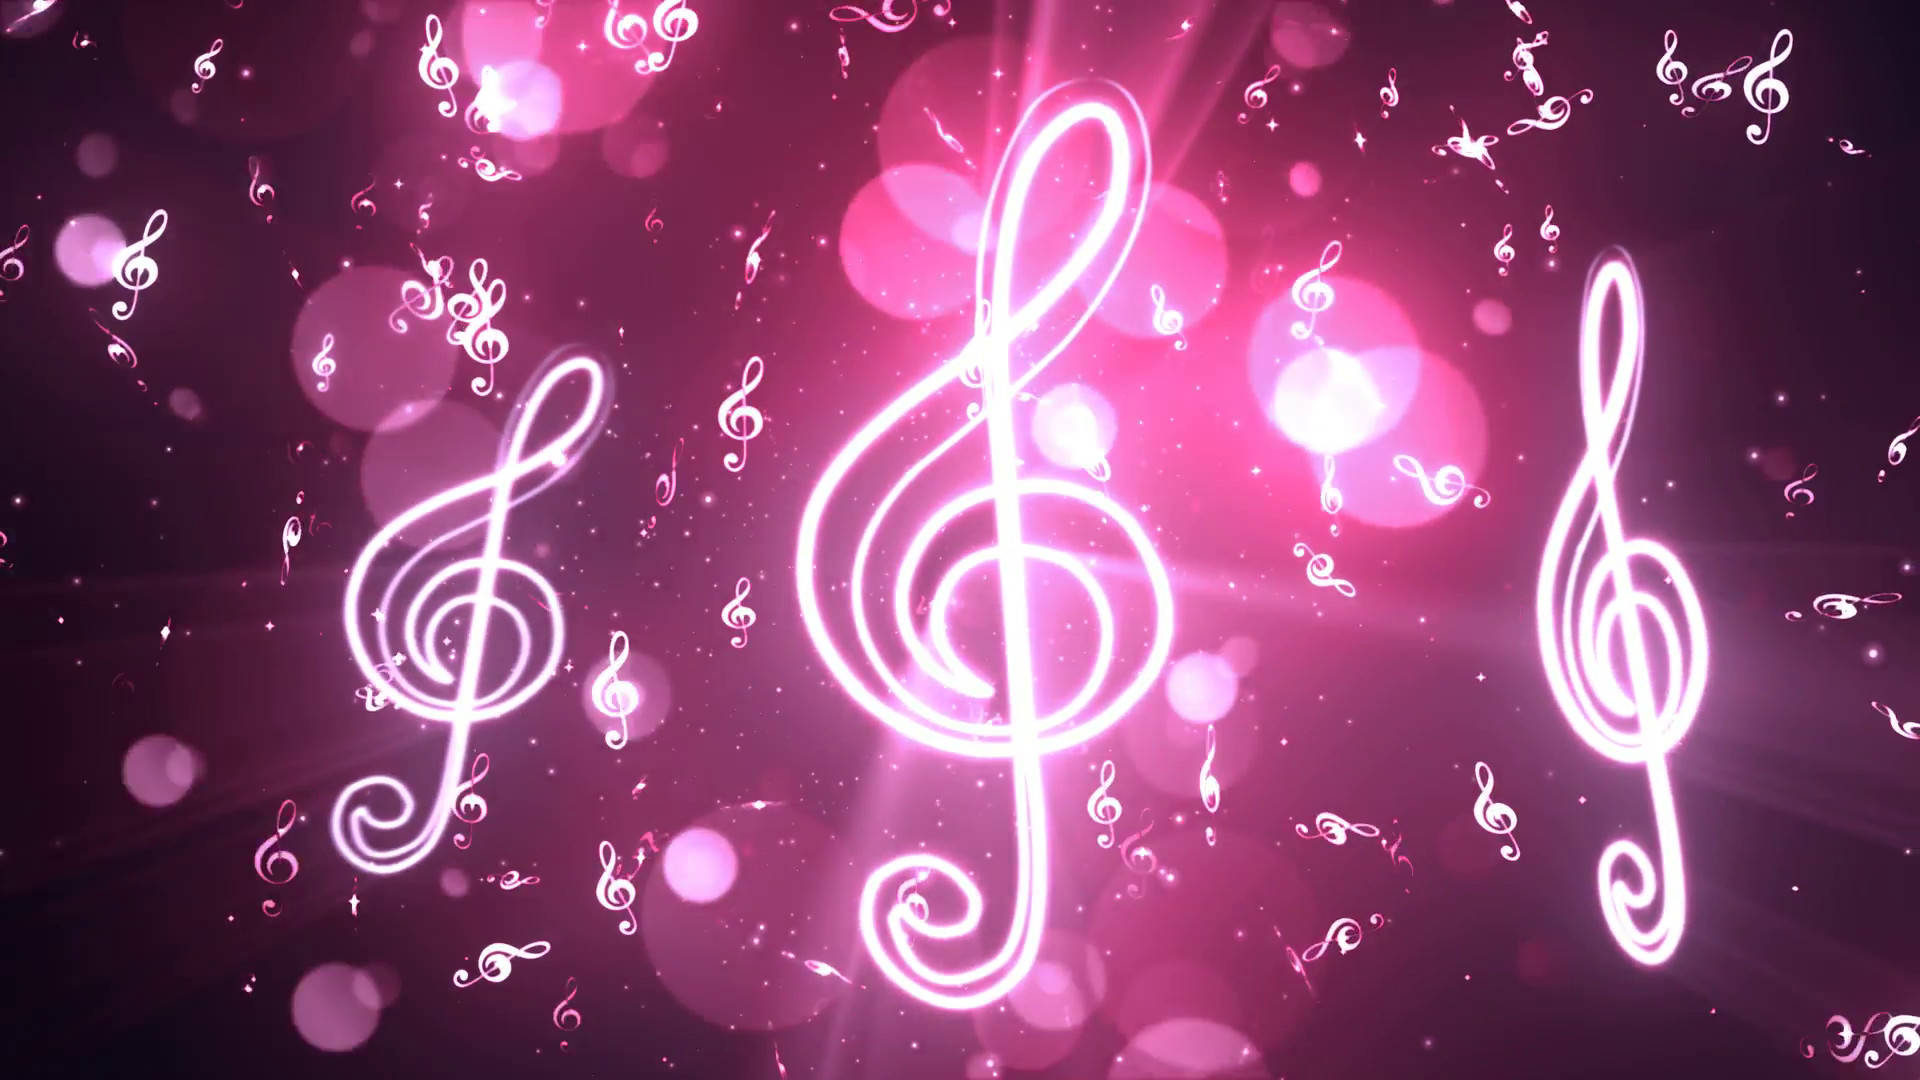 Music Note Wallpaper Lovely Colorful Music Note Iphone  Colorful Music  Notes  1080x1920 Wallpaper  teahubio